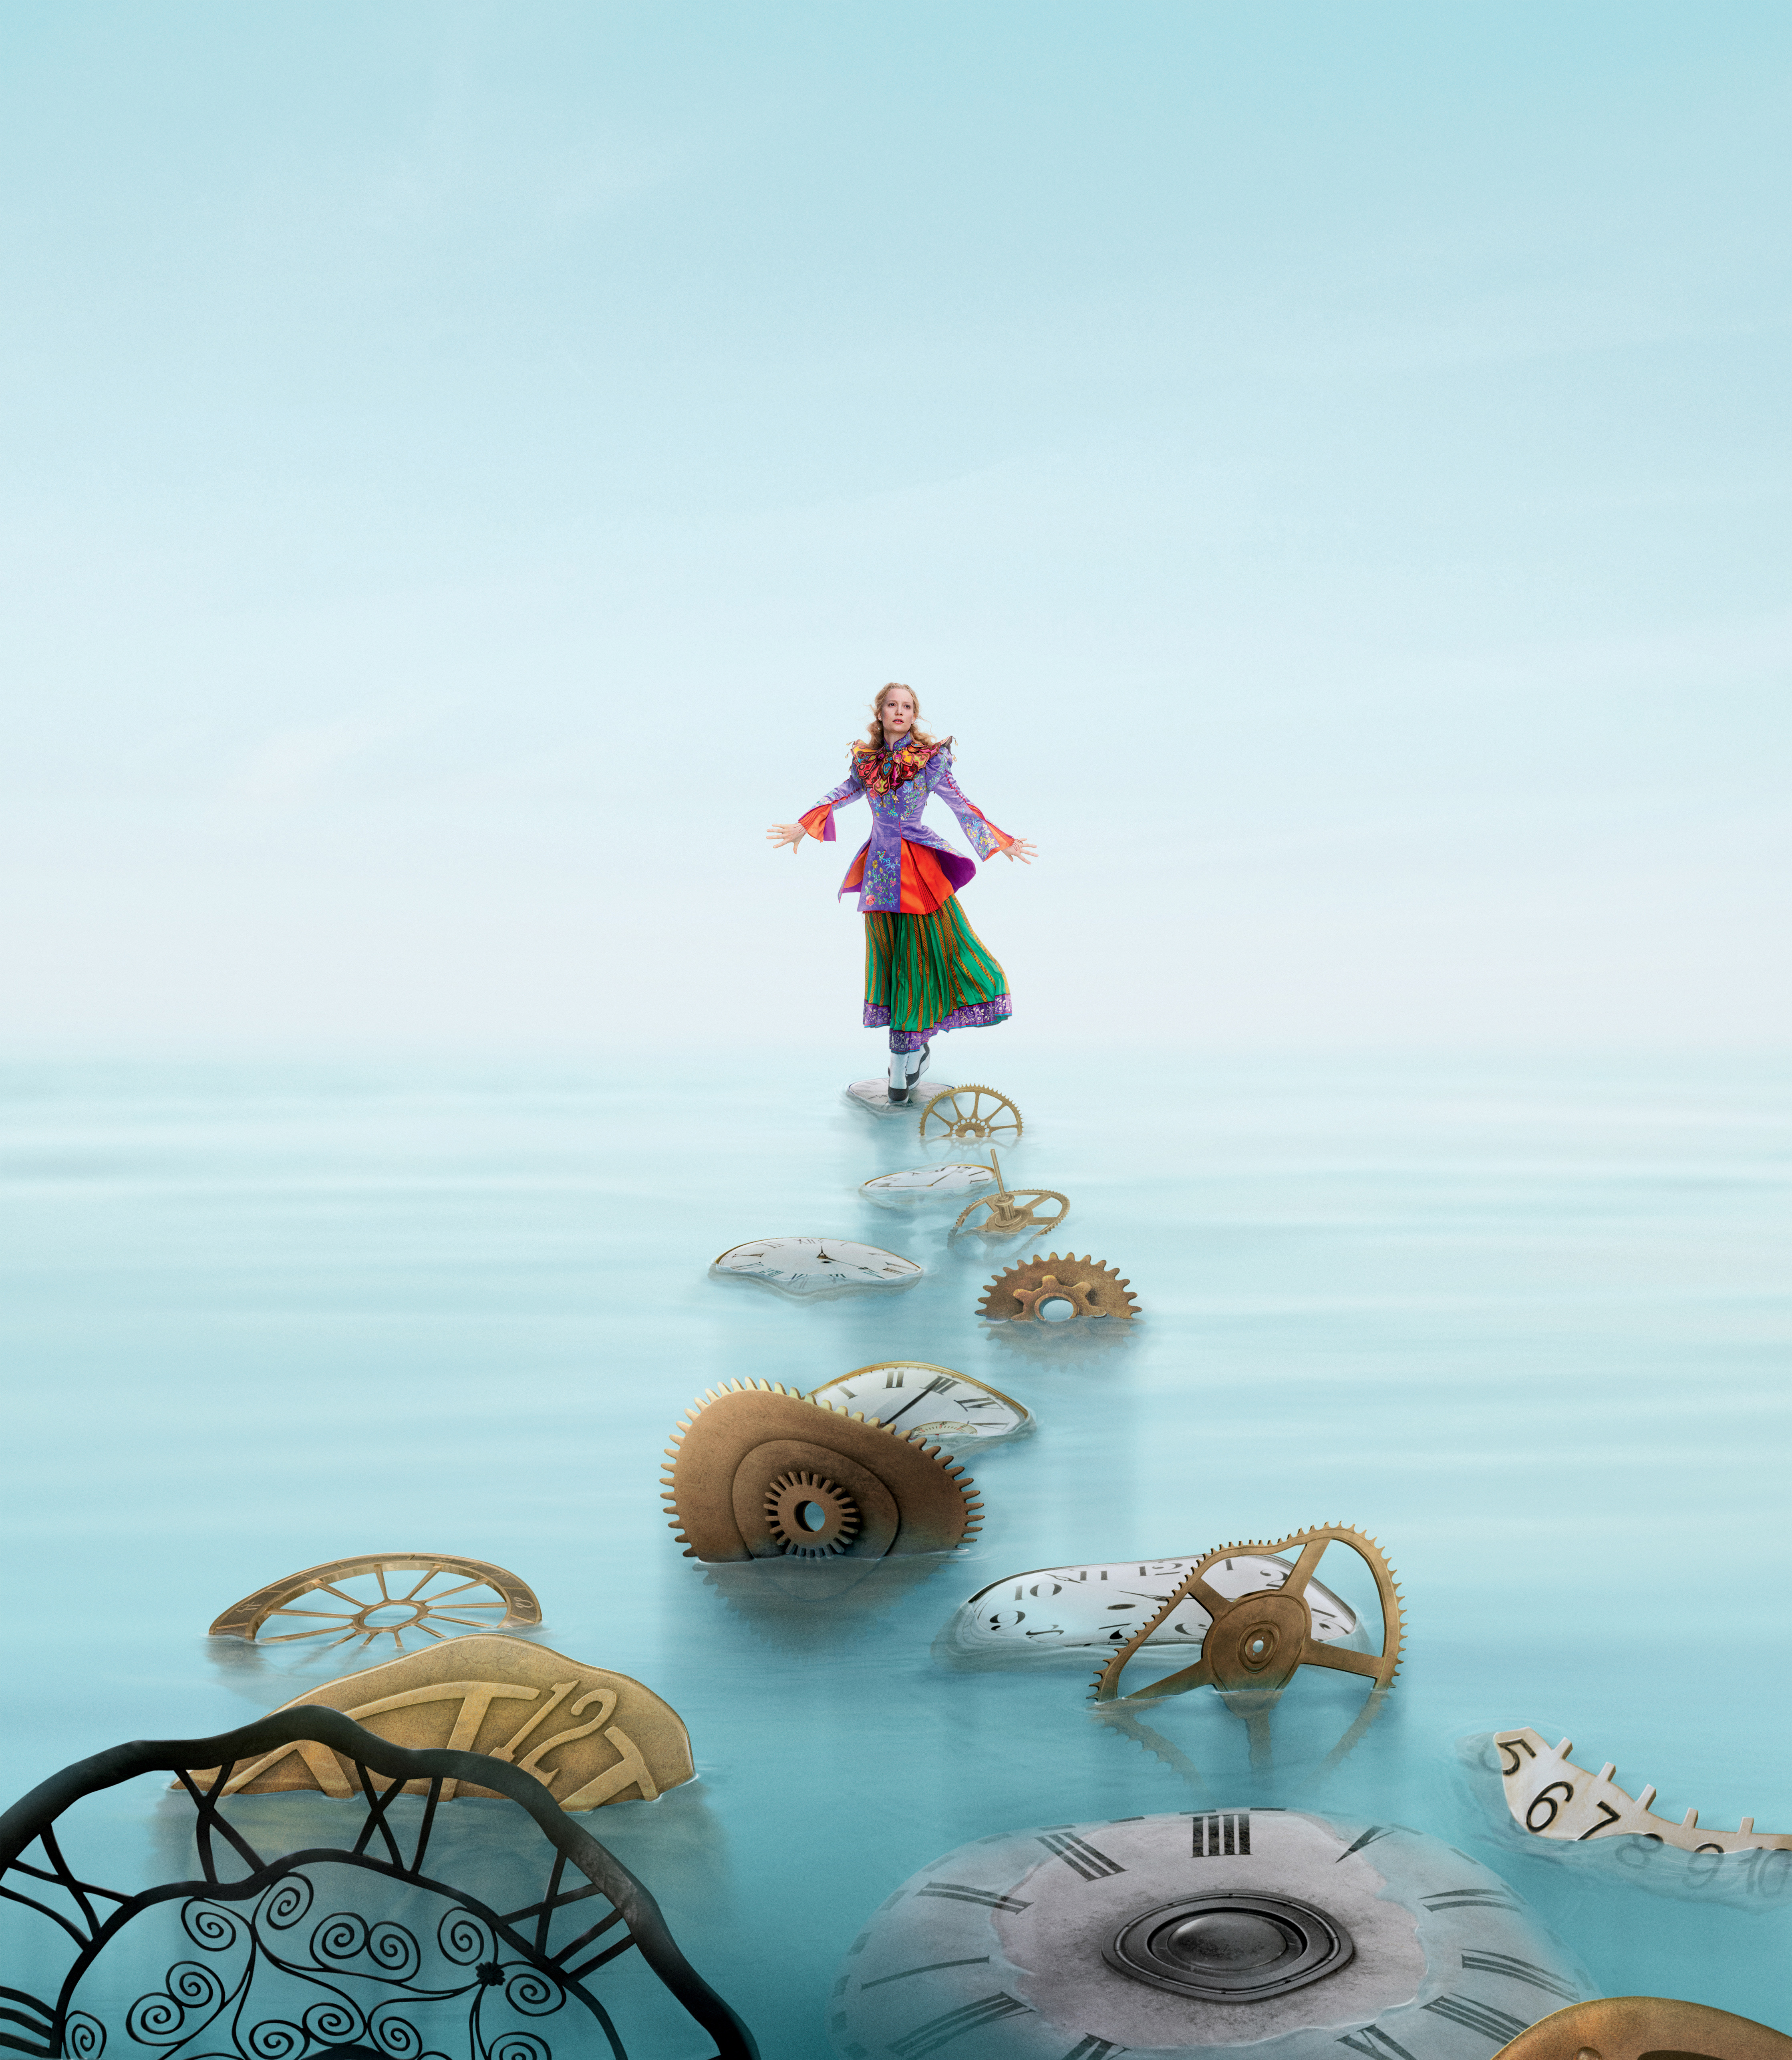 Alice Through The Looking Glass Wallpaper Hd - HD Wallpaper 